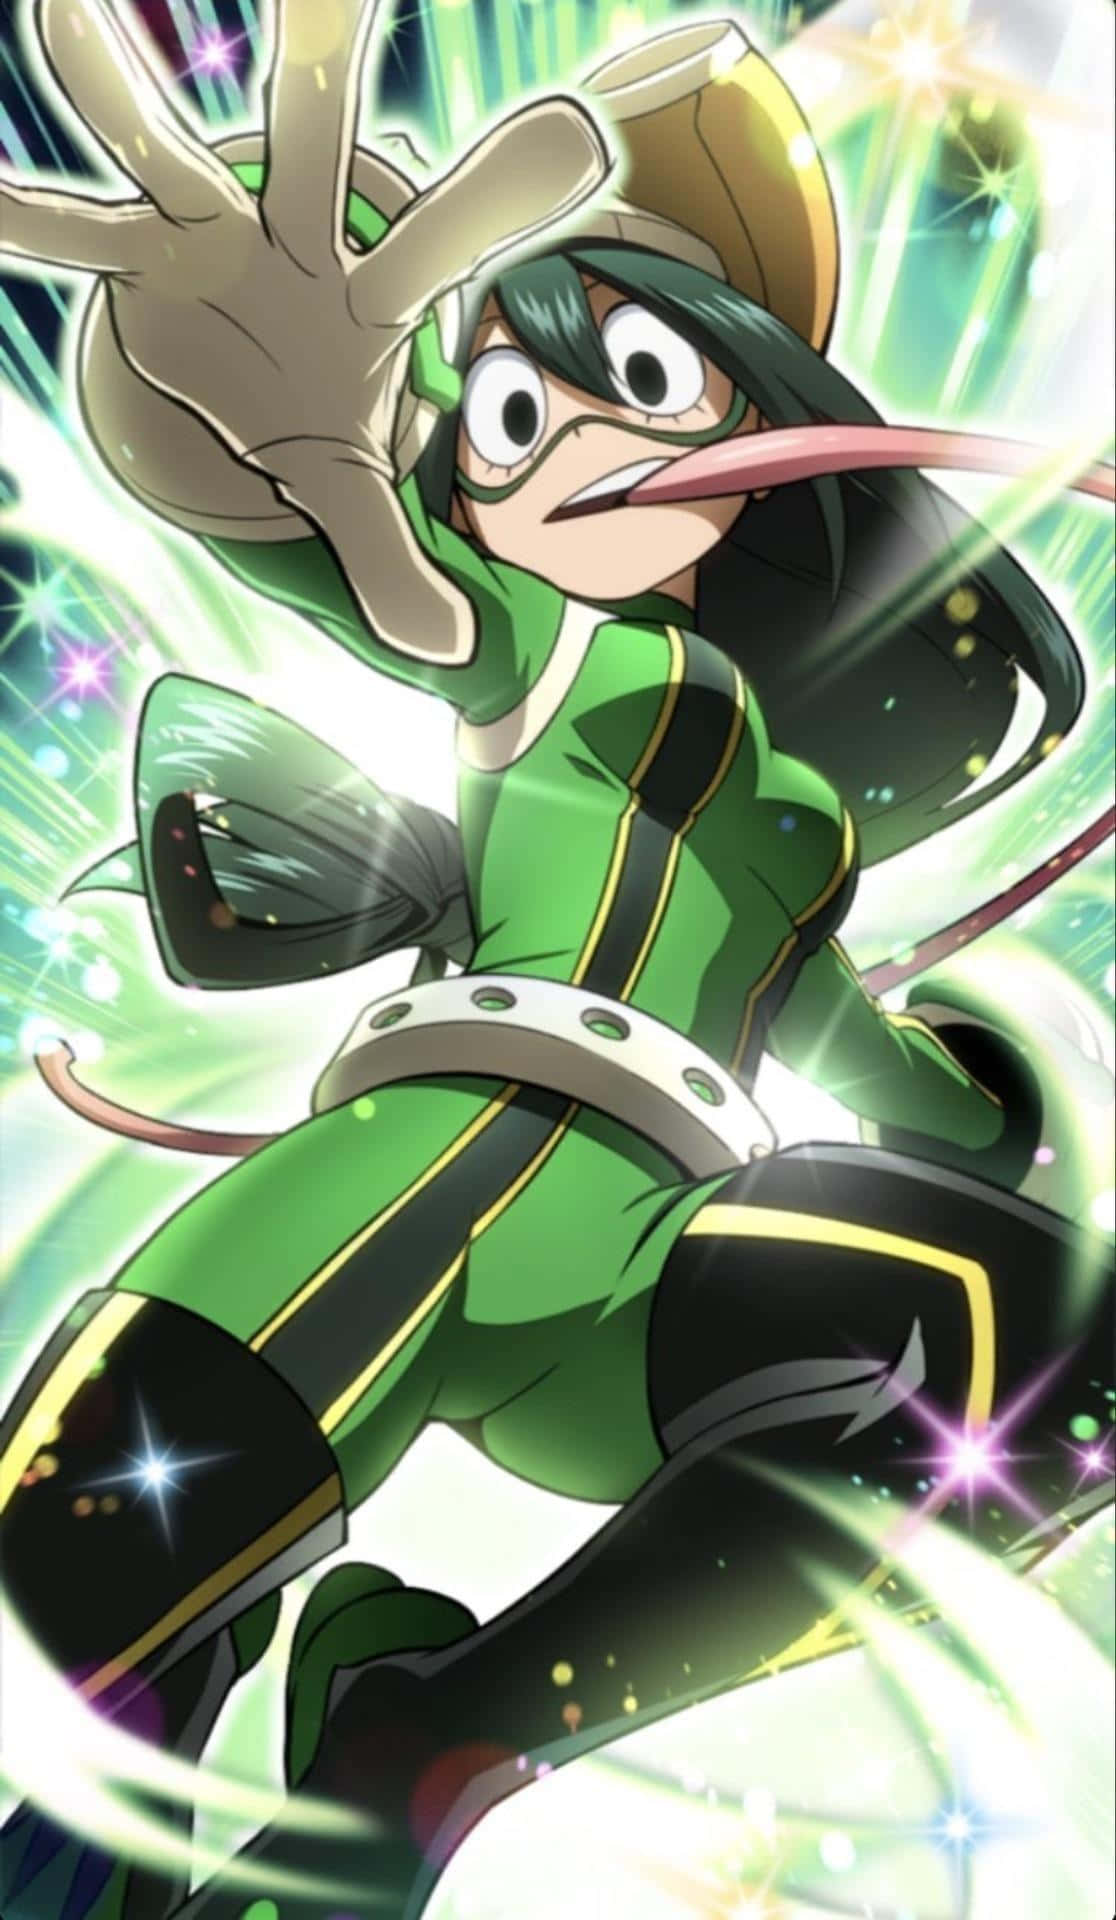 Explore the beauty of nature with Froppy